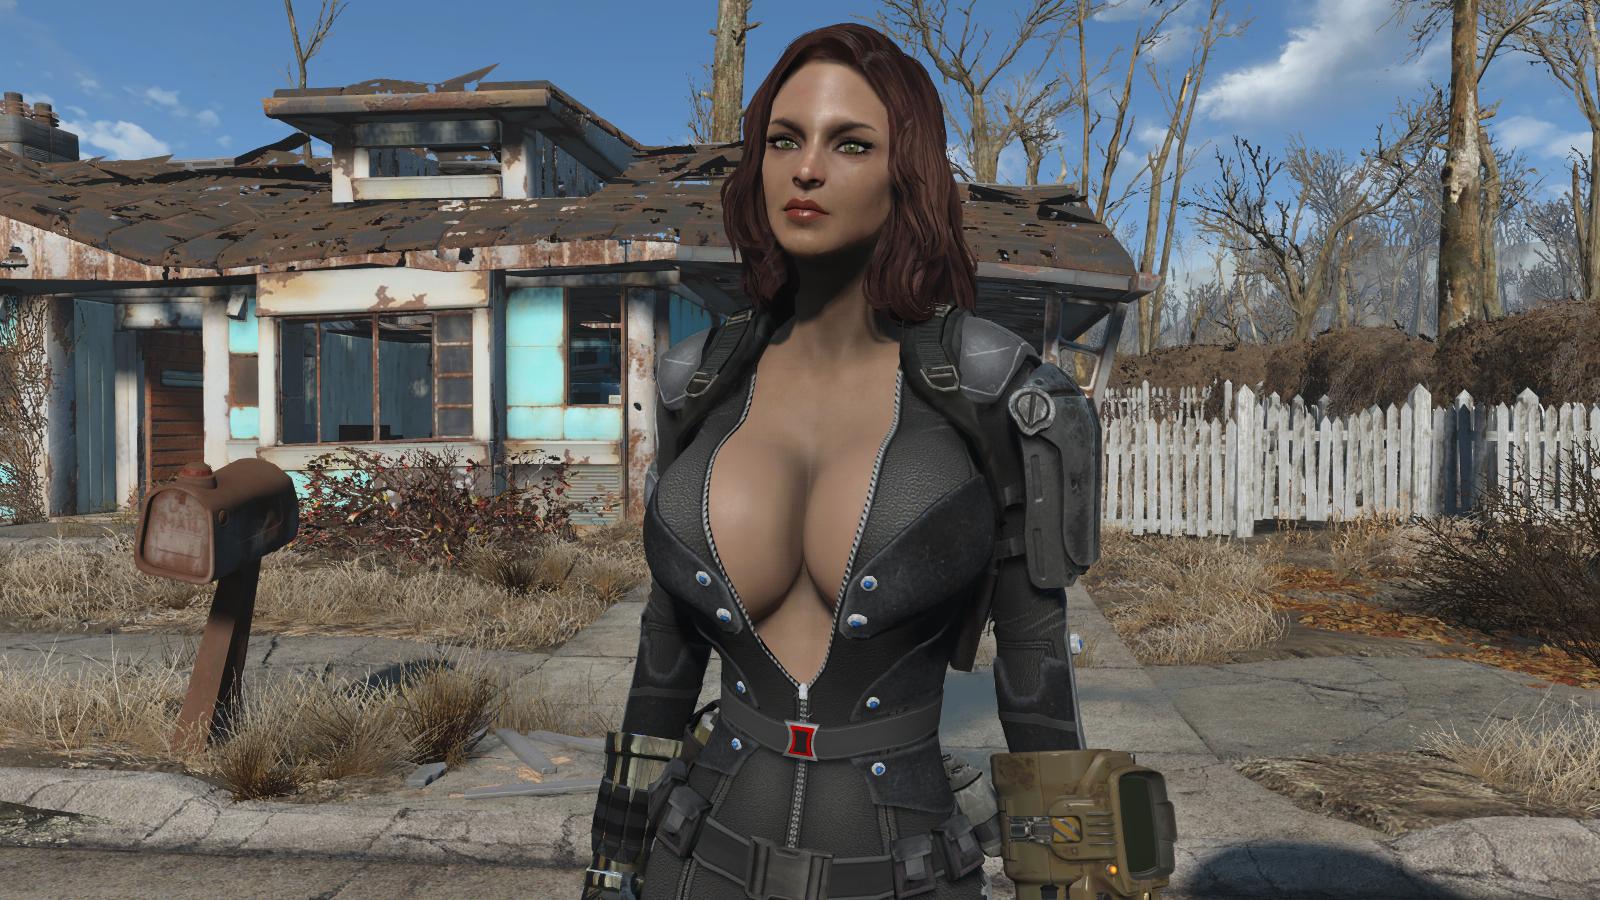 Gallery of Armor 4 Skimpy Fallout Replacermod.